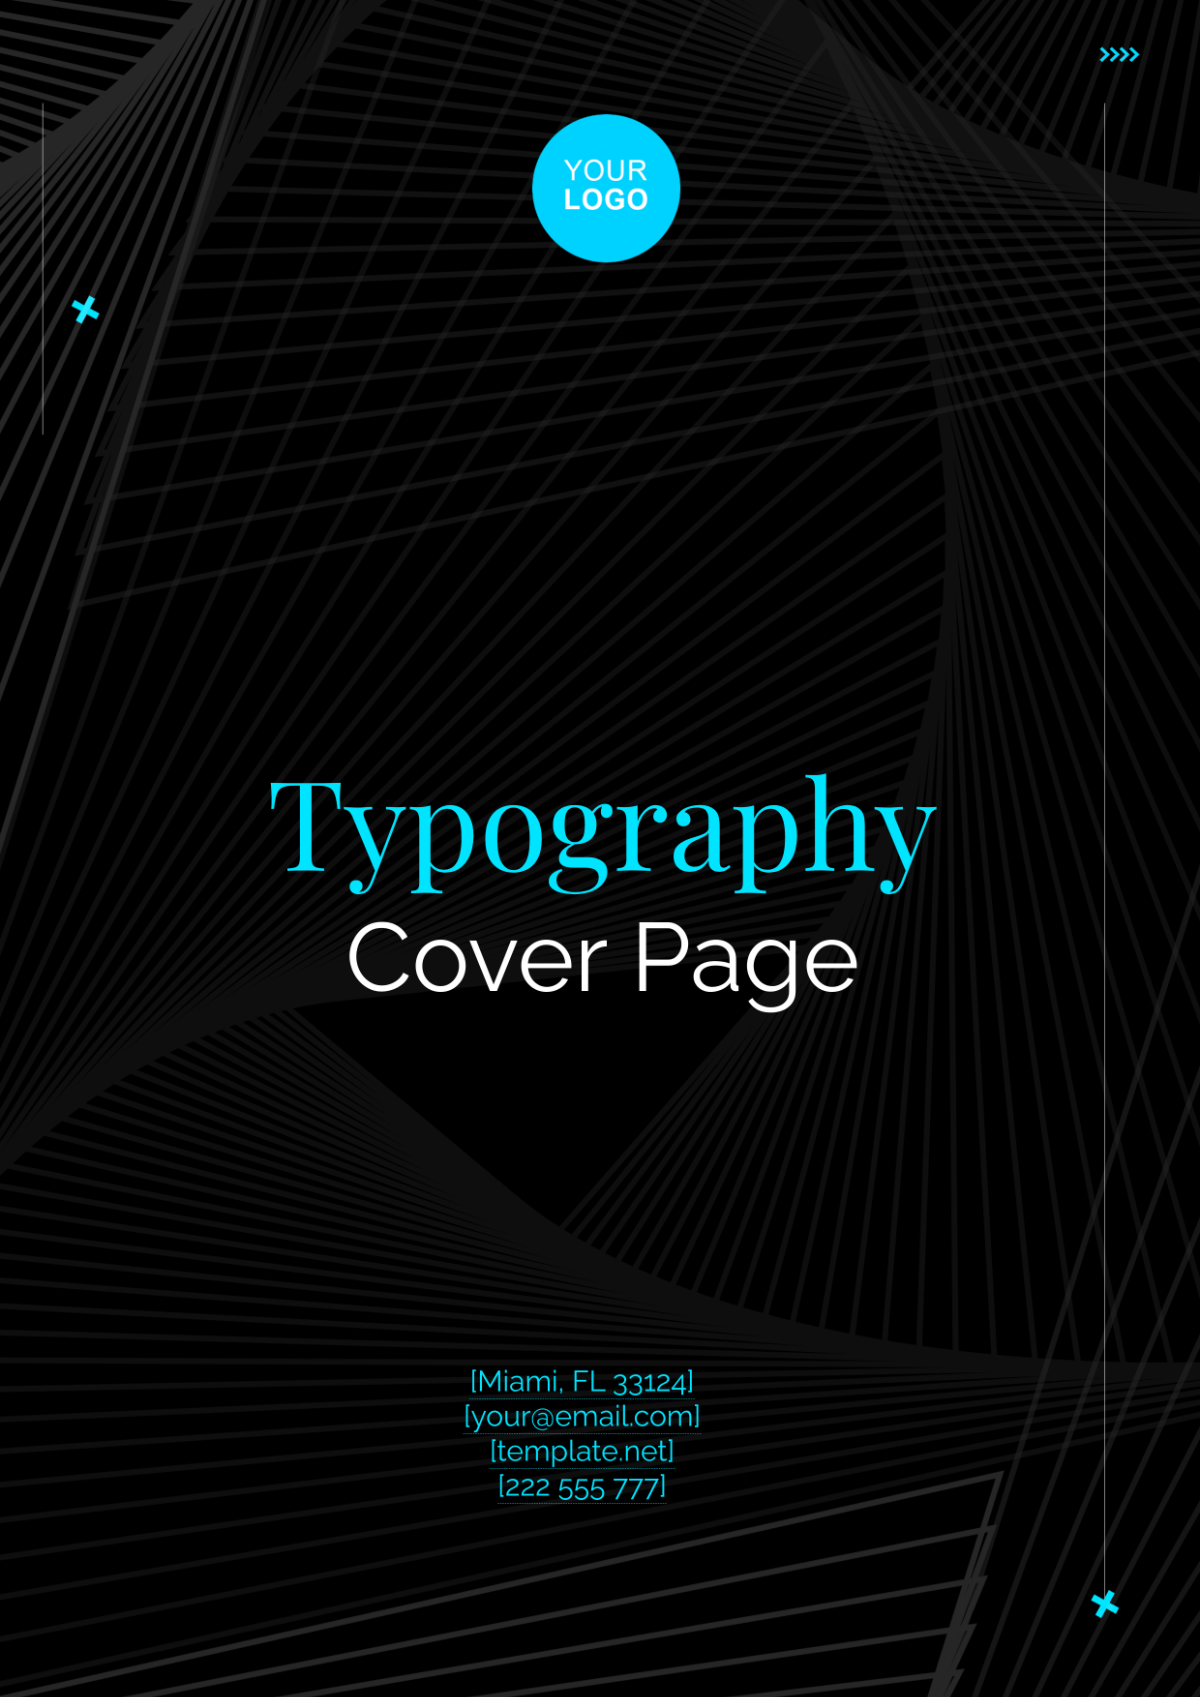 Typography Cover Page Design